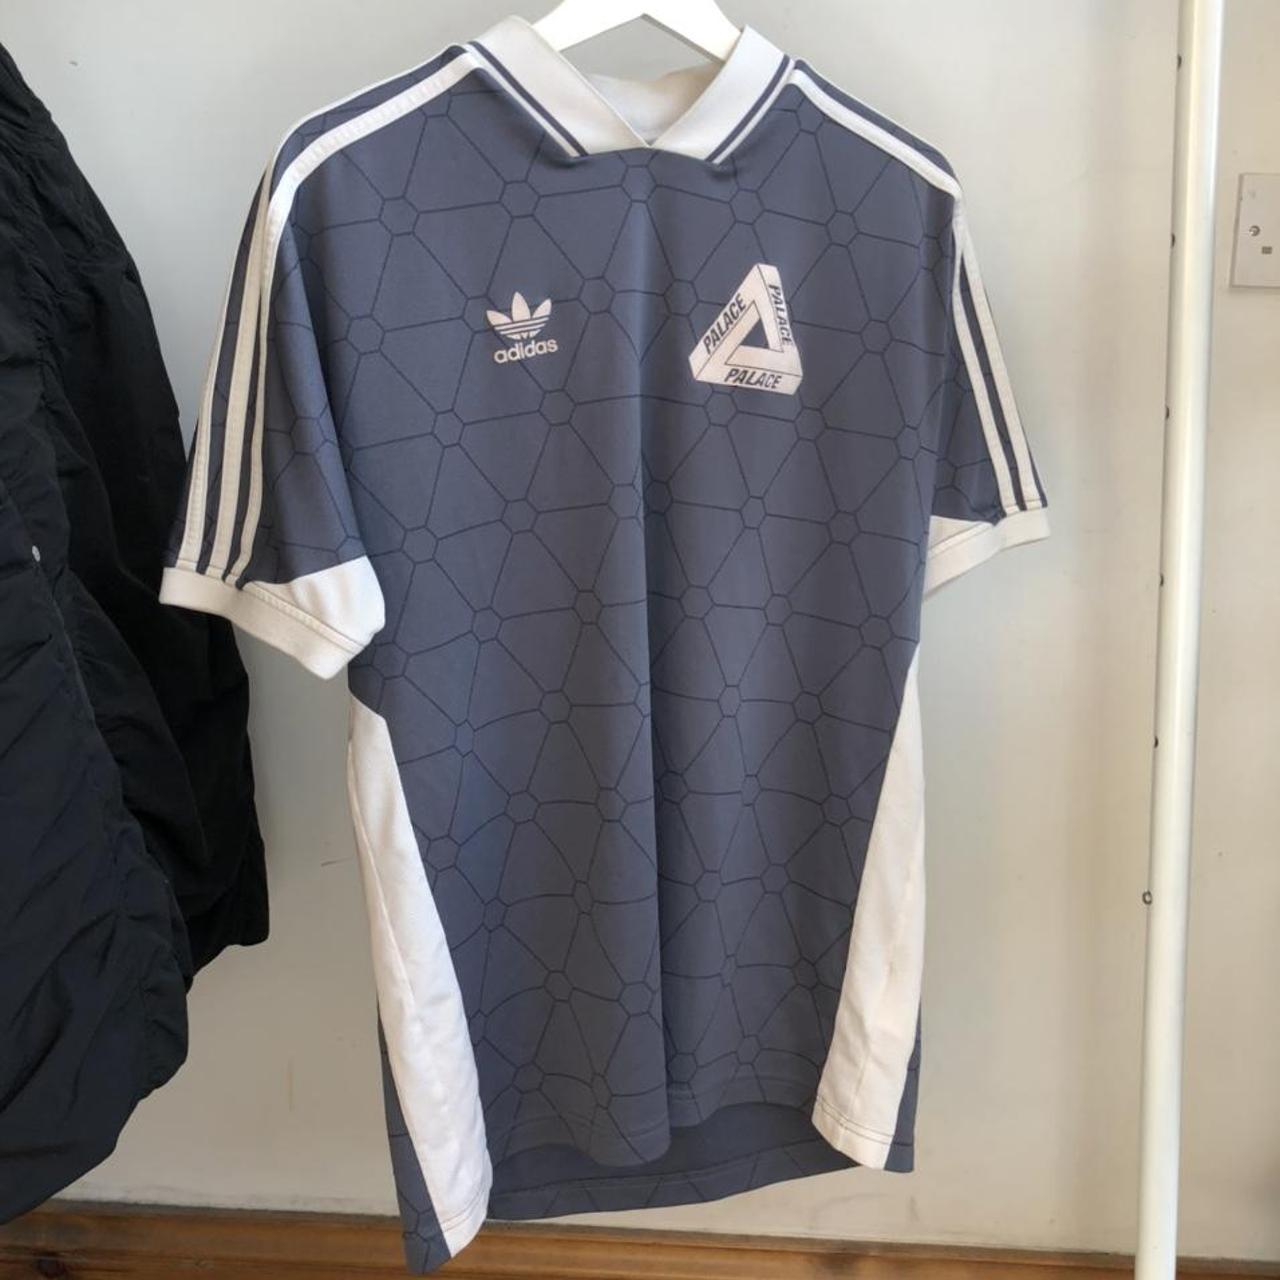 Palace football shirt, used but good condition no... - Depop